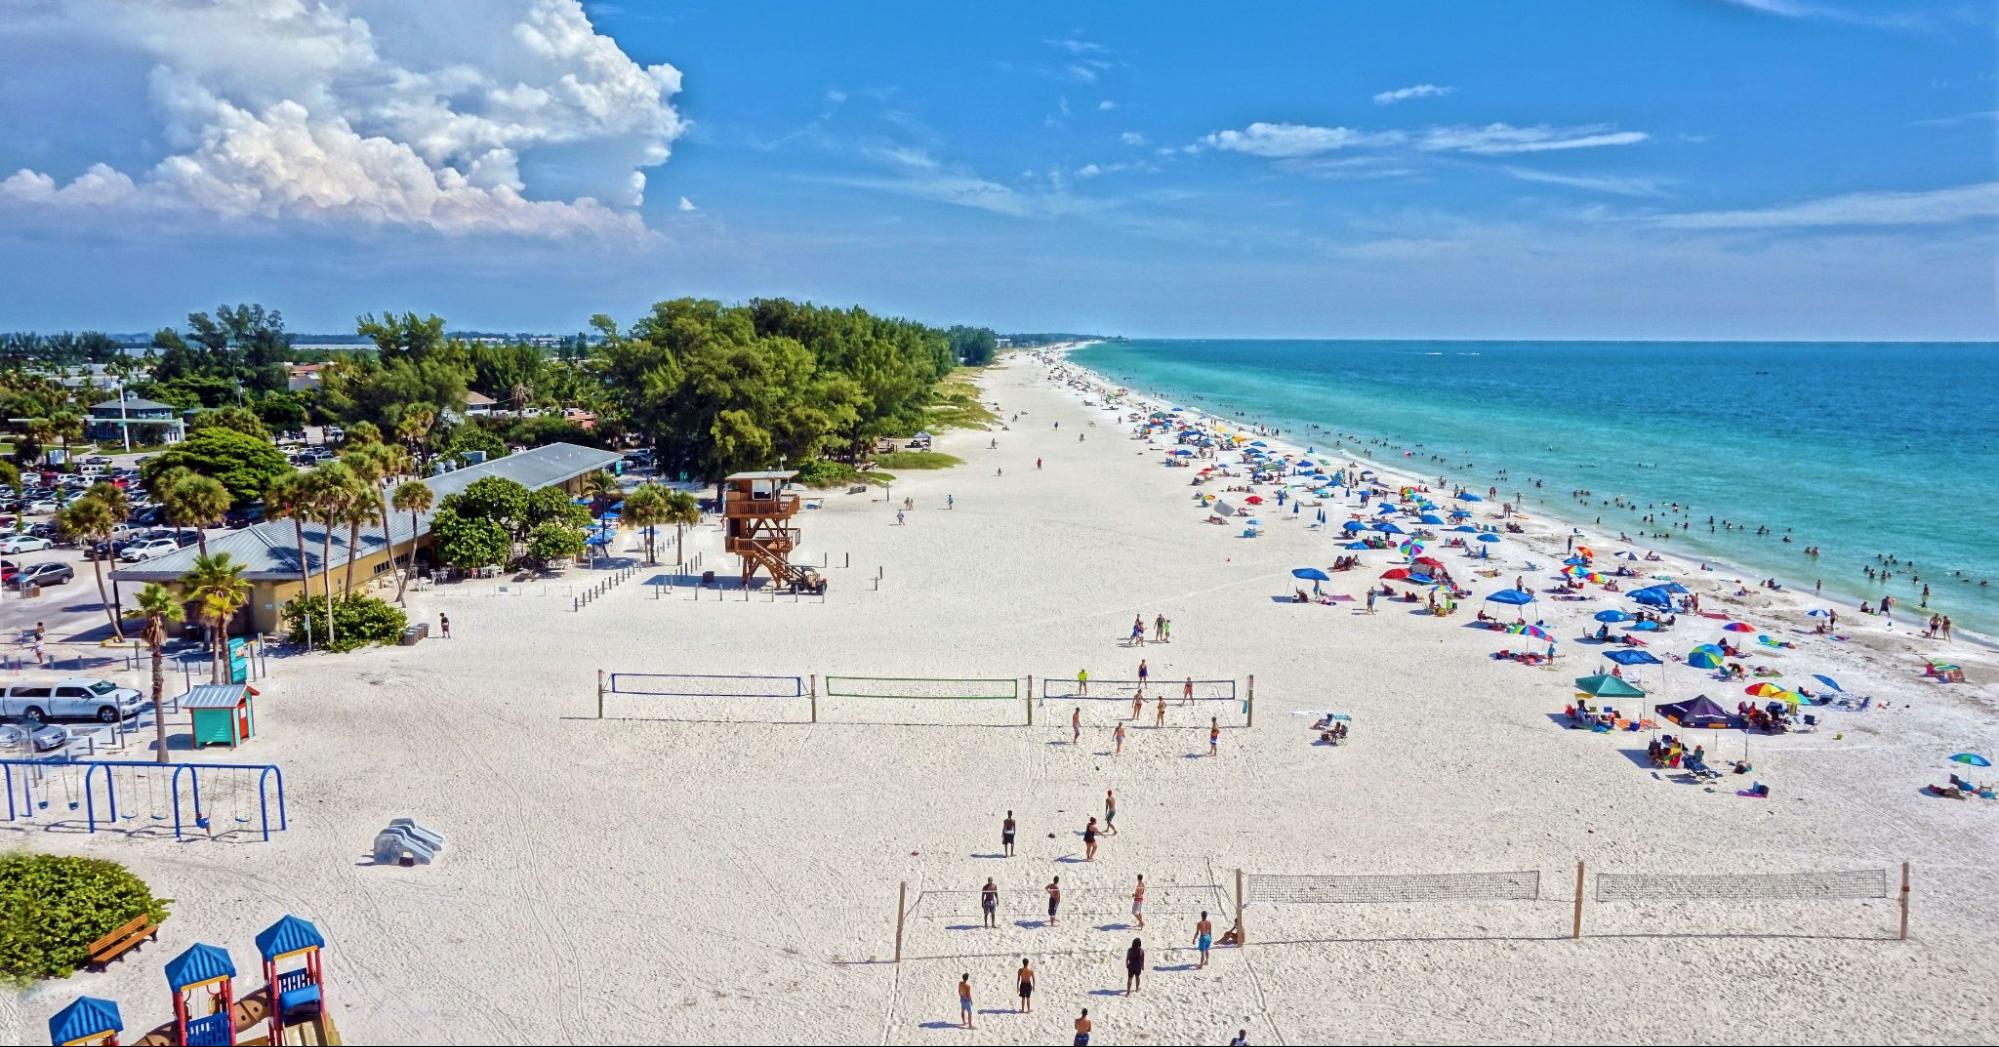 What month is best to go to Anna Maria Island